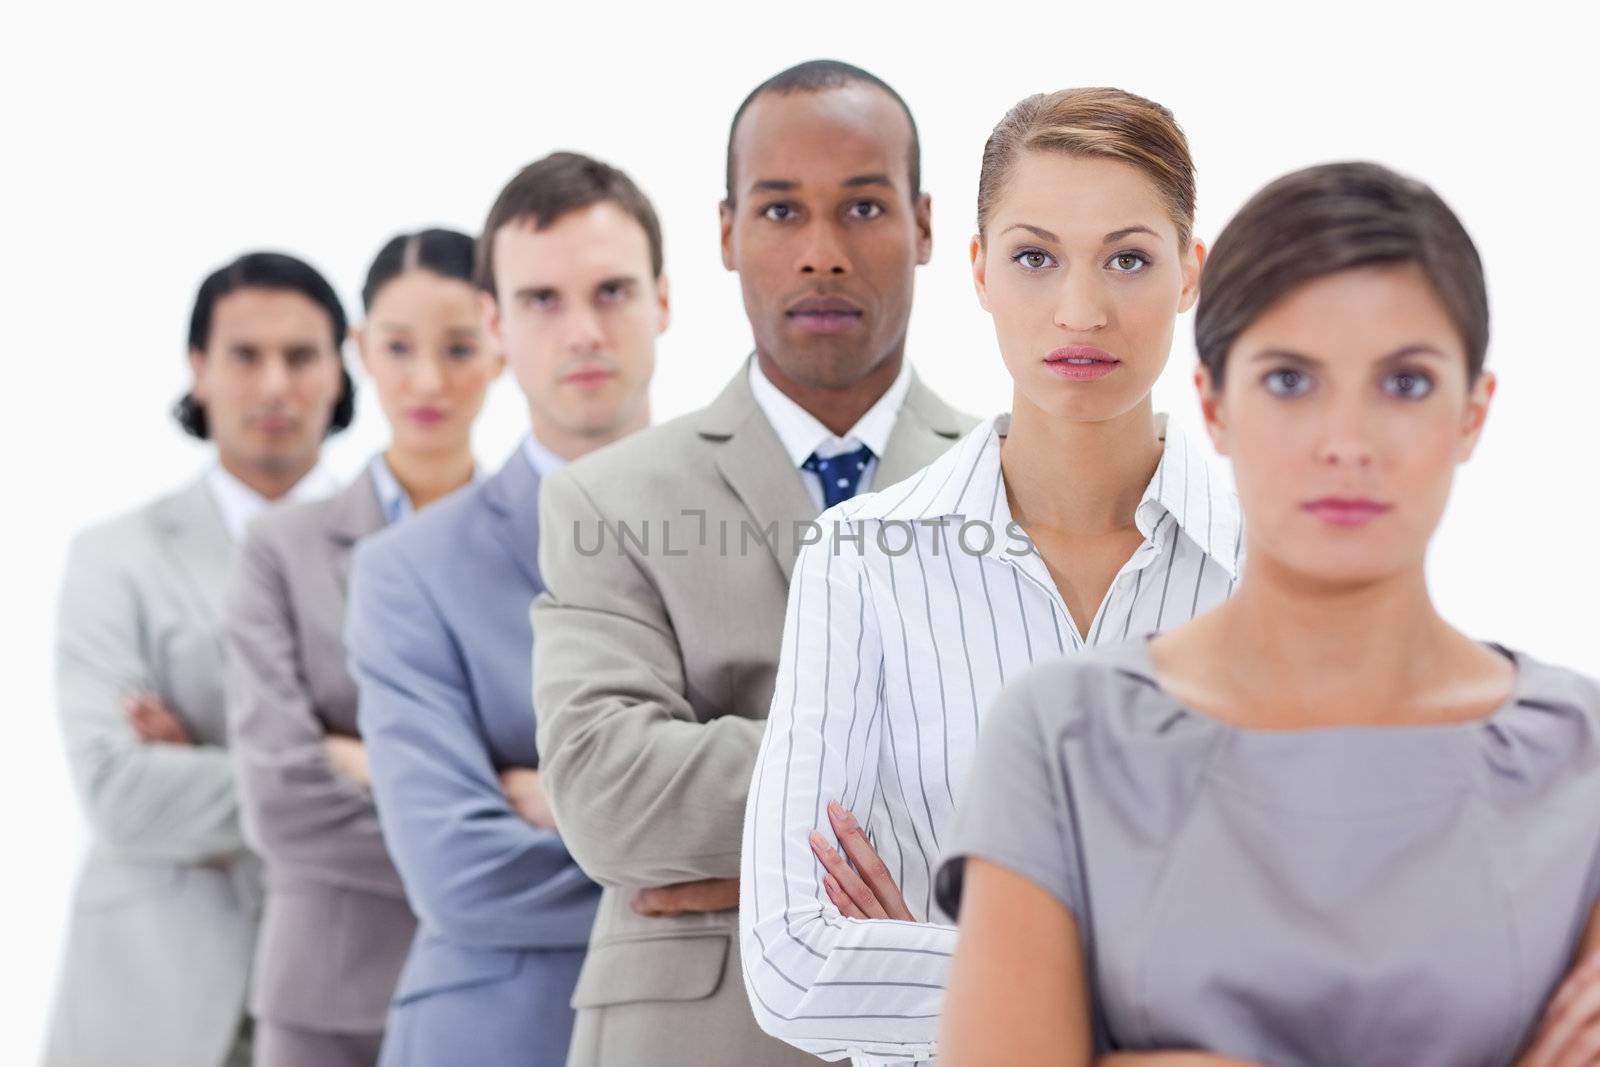 Big close-up of a serious business team in a single line crossing their arms with focus on the second woman